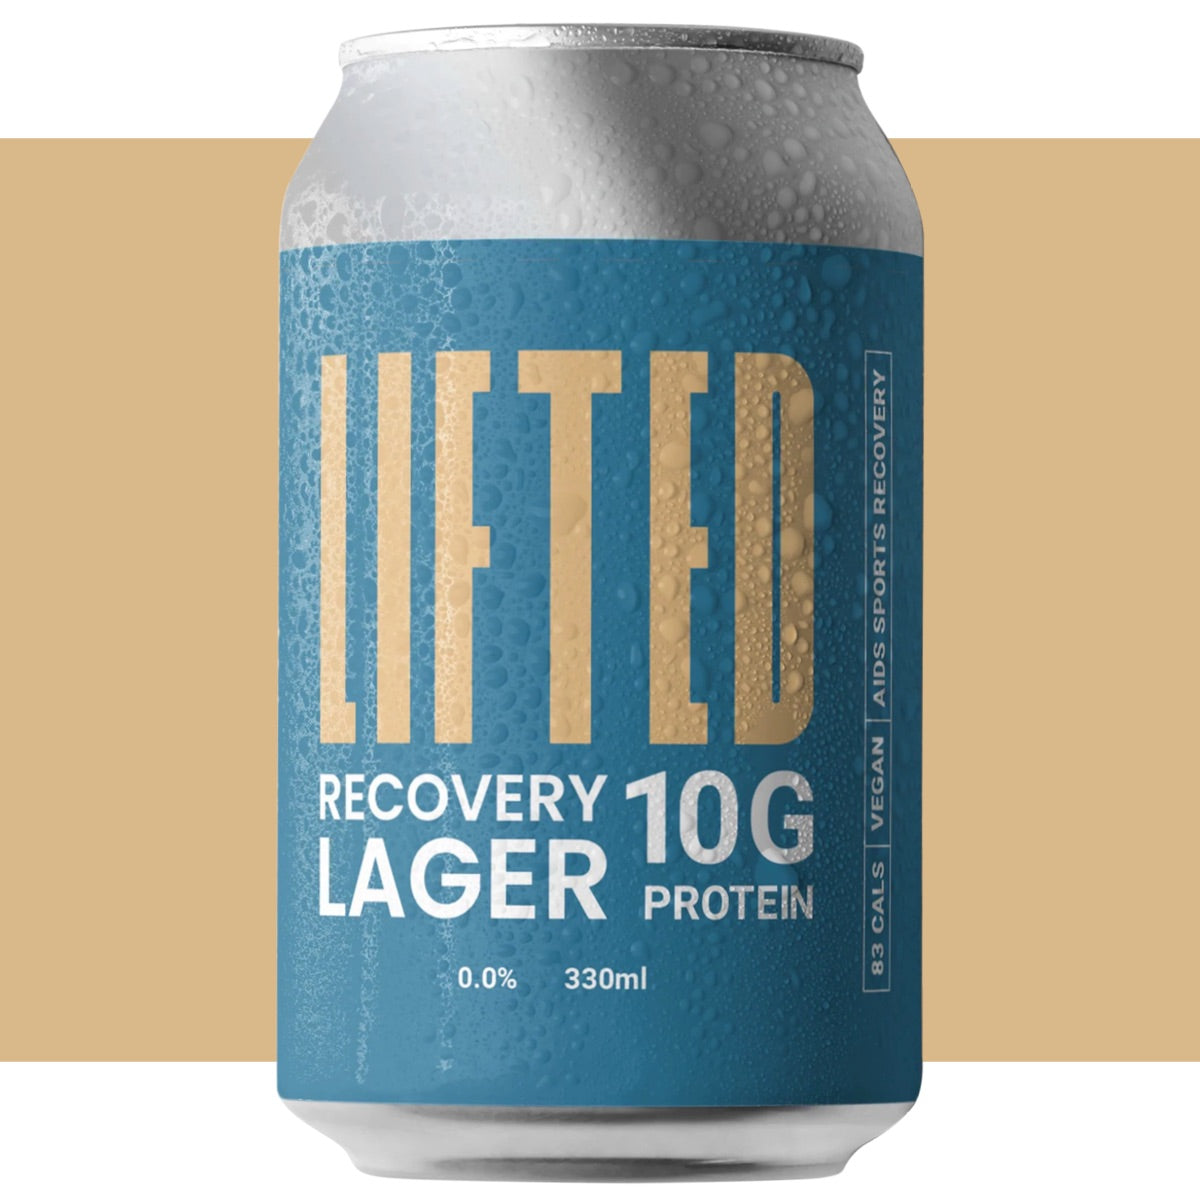 LIFTED Alcohol-Free High Protein Recovery Lager